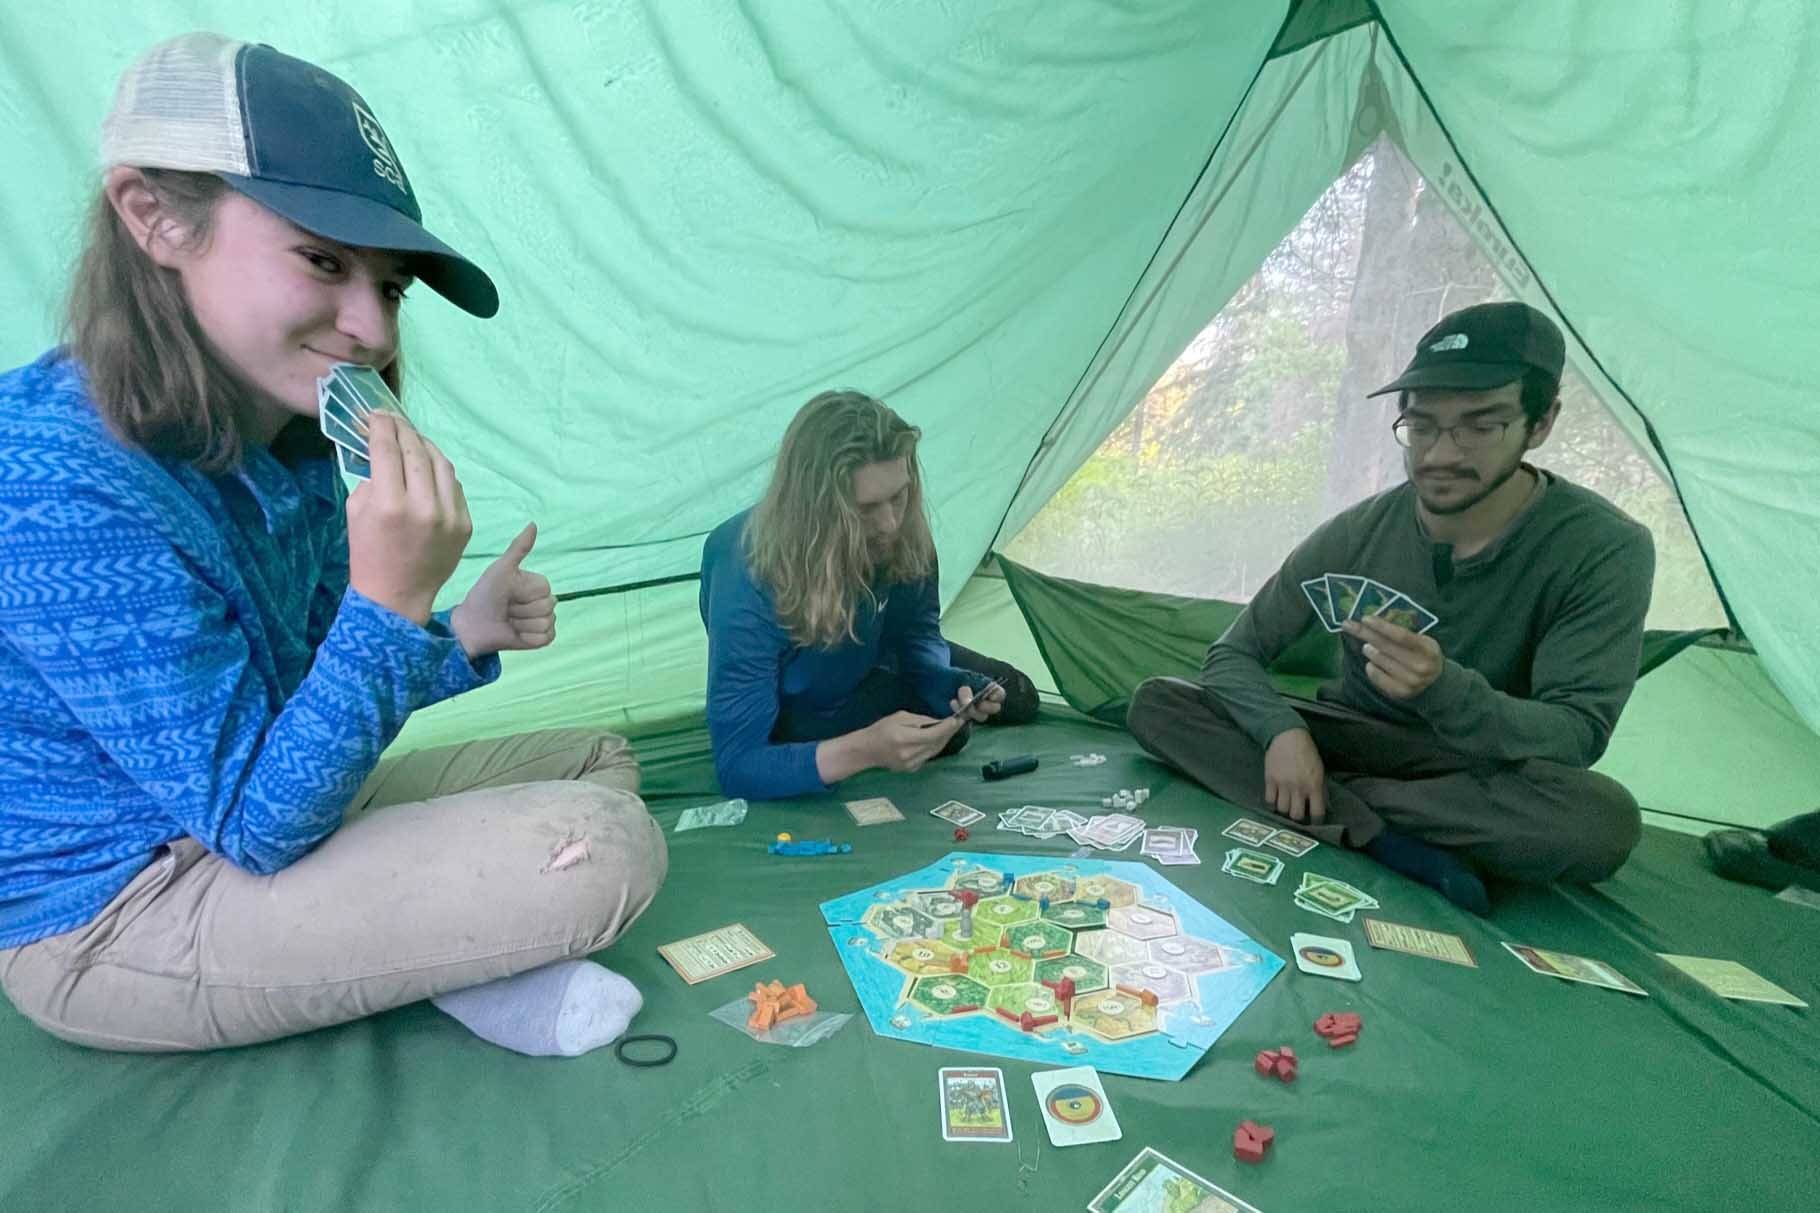 A Student Conservation Association team builds traditions around a game of Catan in a tent by Funny River. (Photo by US Fish and Wildlife Service)